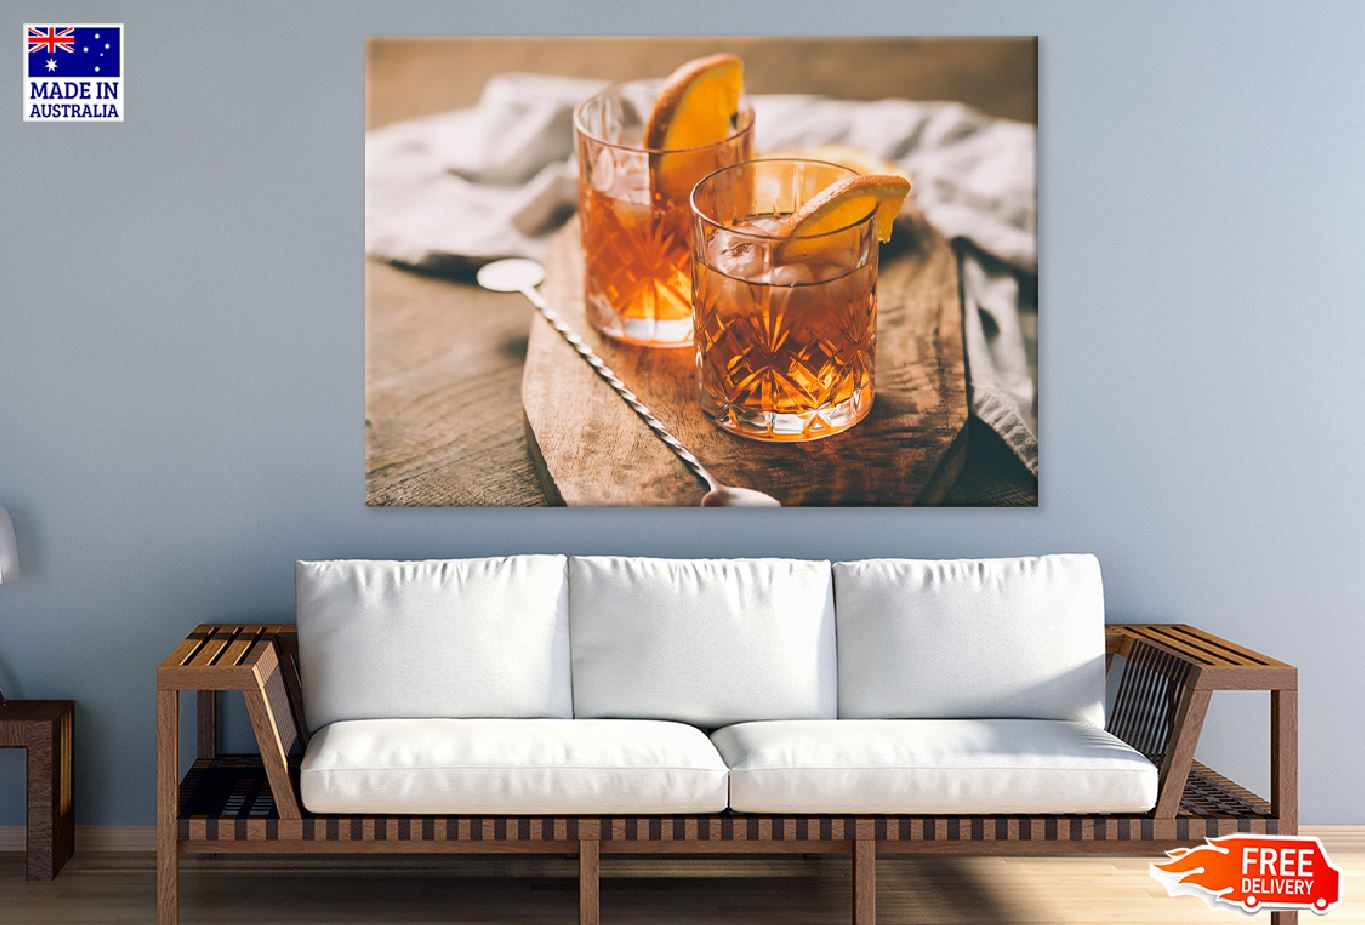 Two Glasses Cocktail with Orange Photograph Print 100% Australian Made